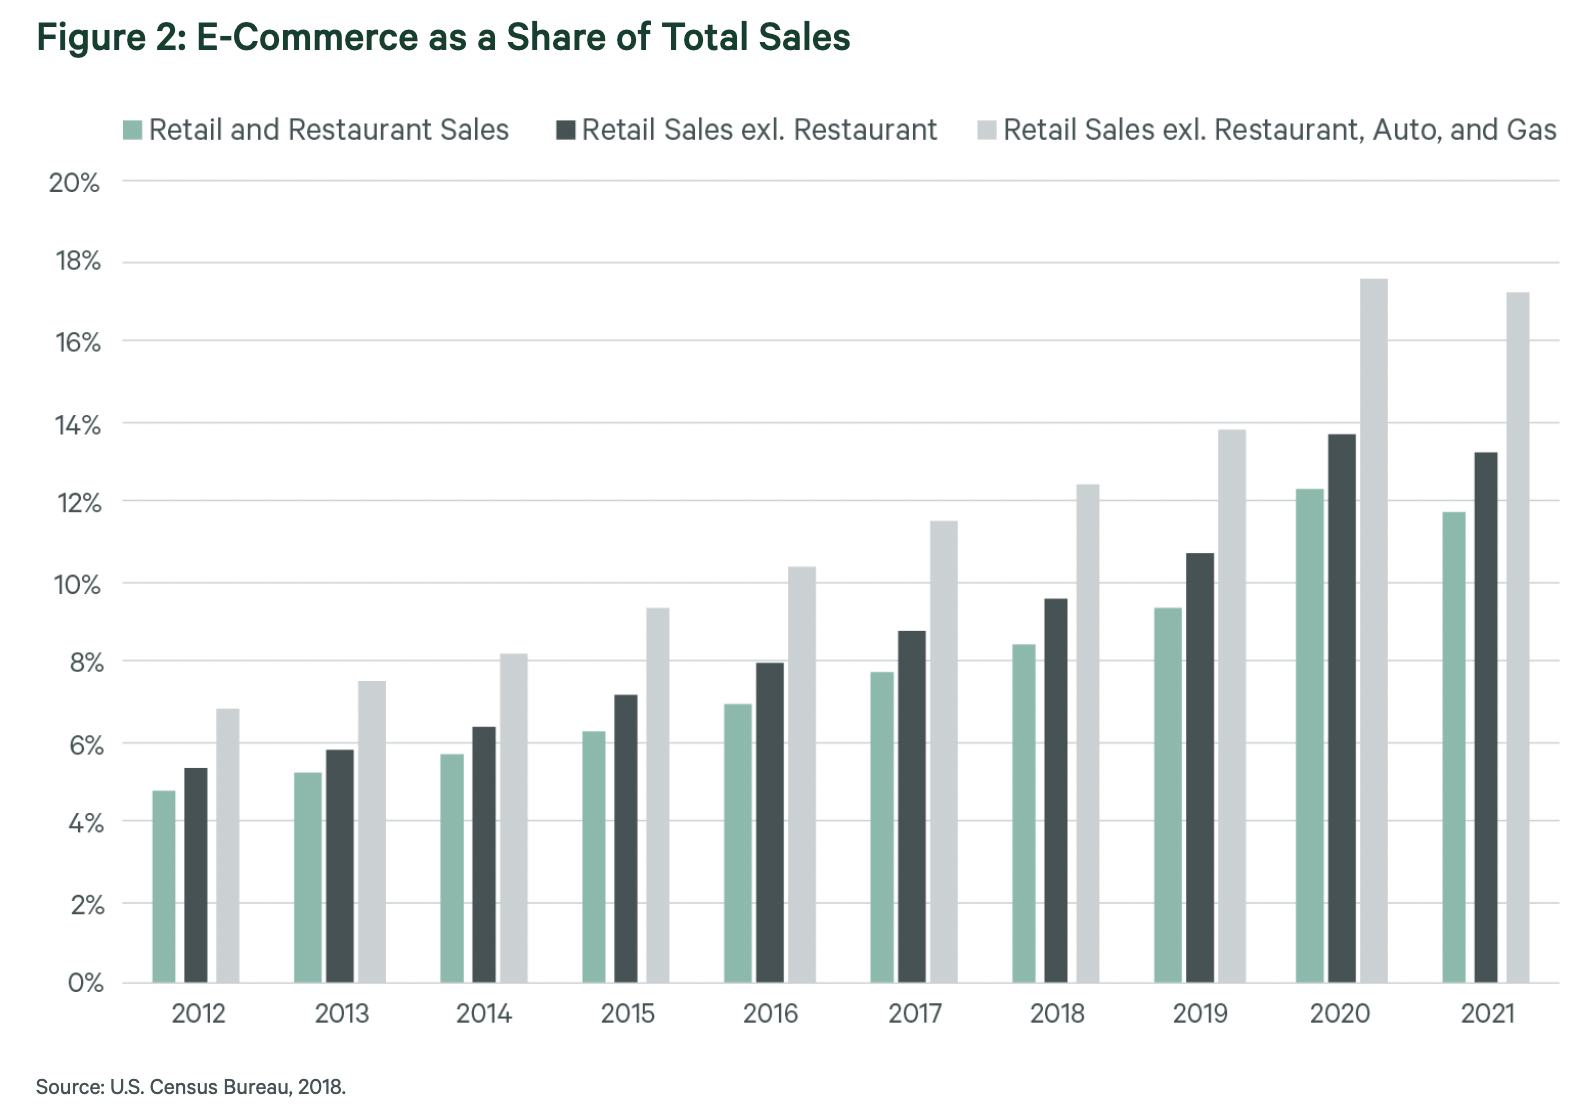 eCommerce as a share of total sales